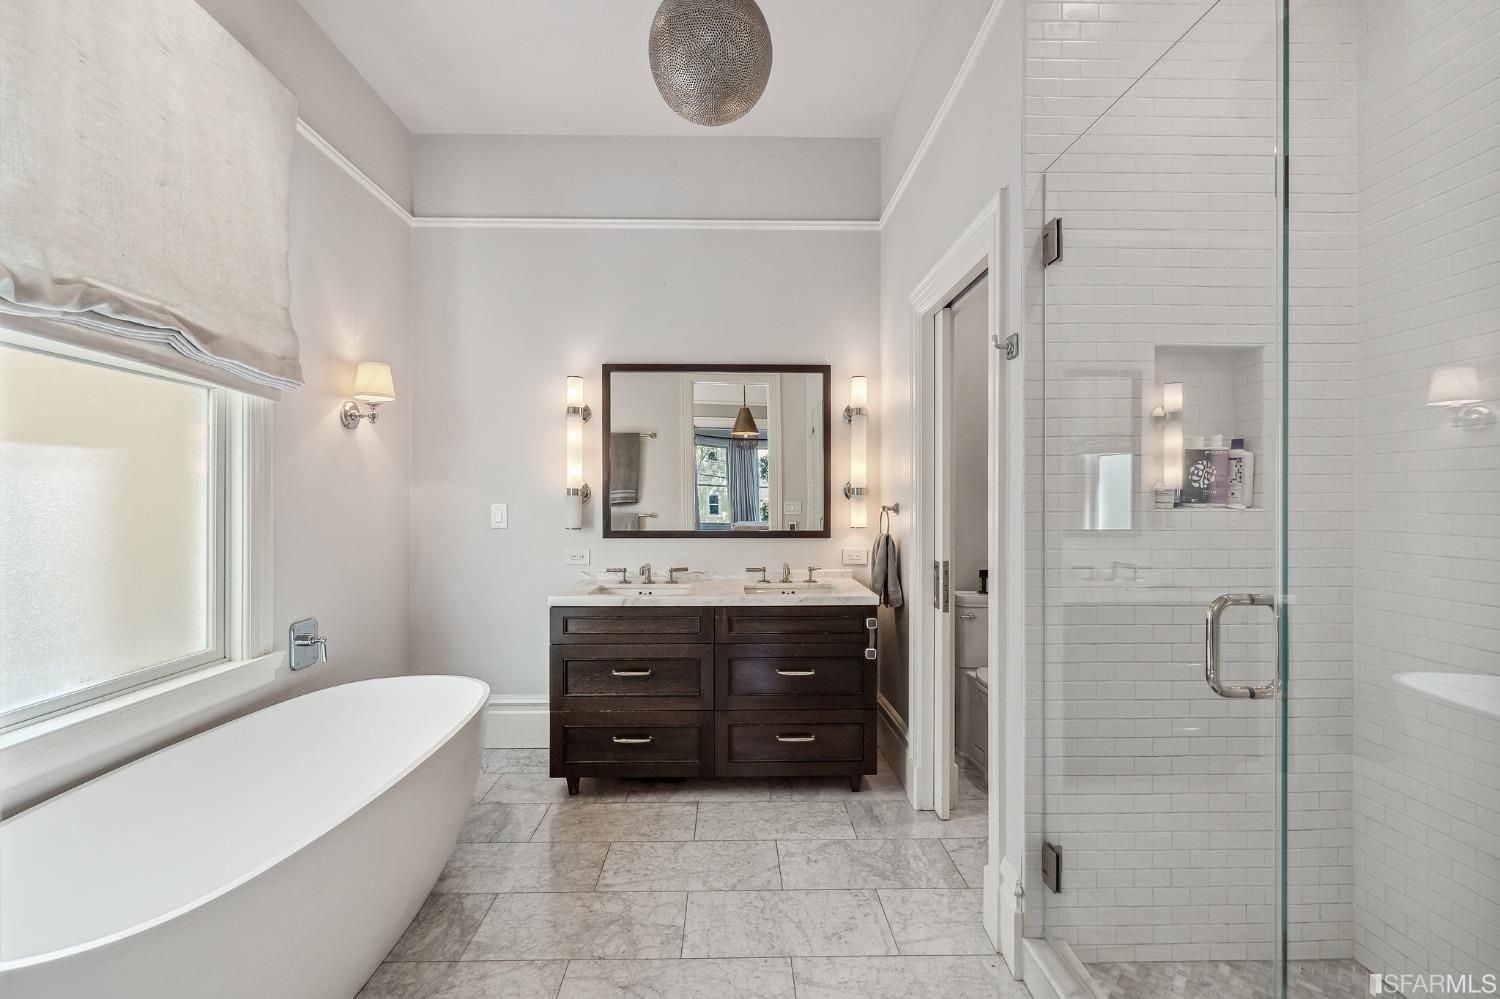 Property Photo: Primary ensuite, featuring a large free-standing bath tub, glass shower, and double vanity